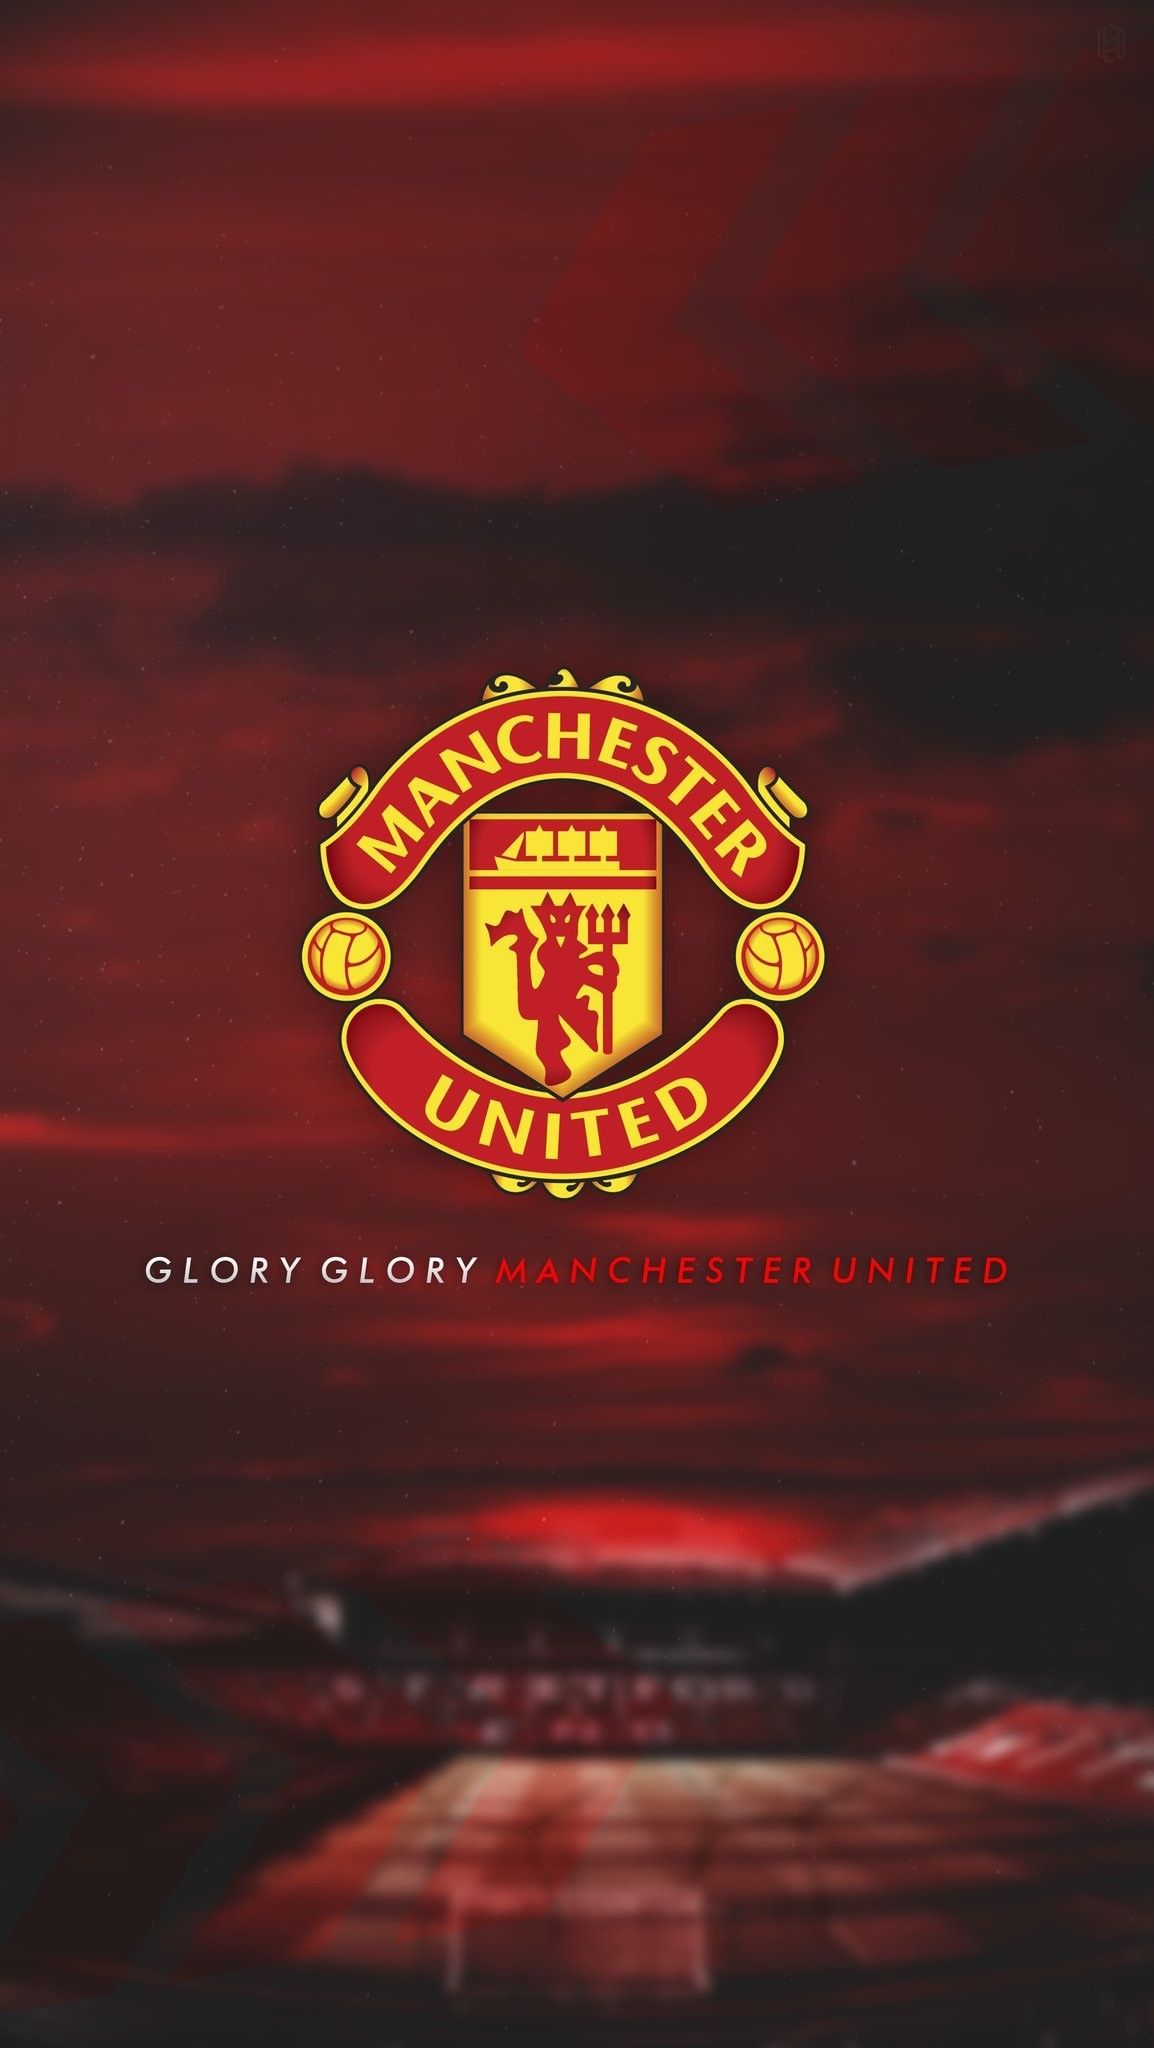 Retro Manchester United Wallpapers - Wallpaper Cave